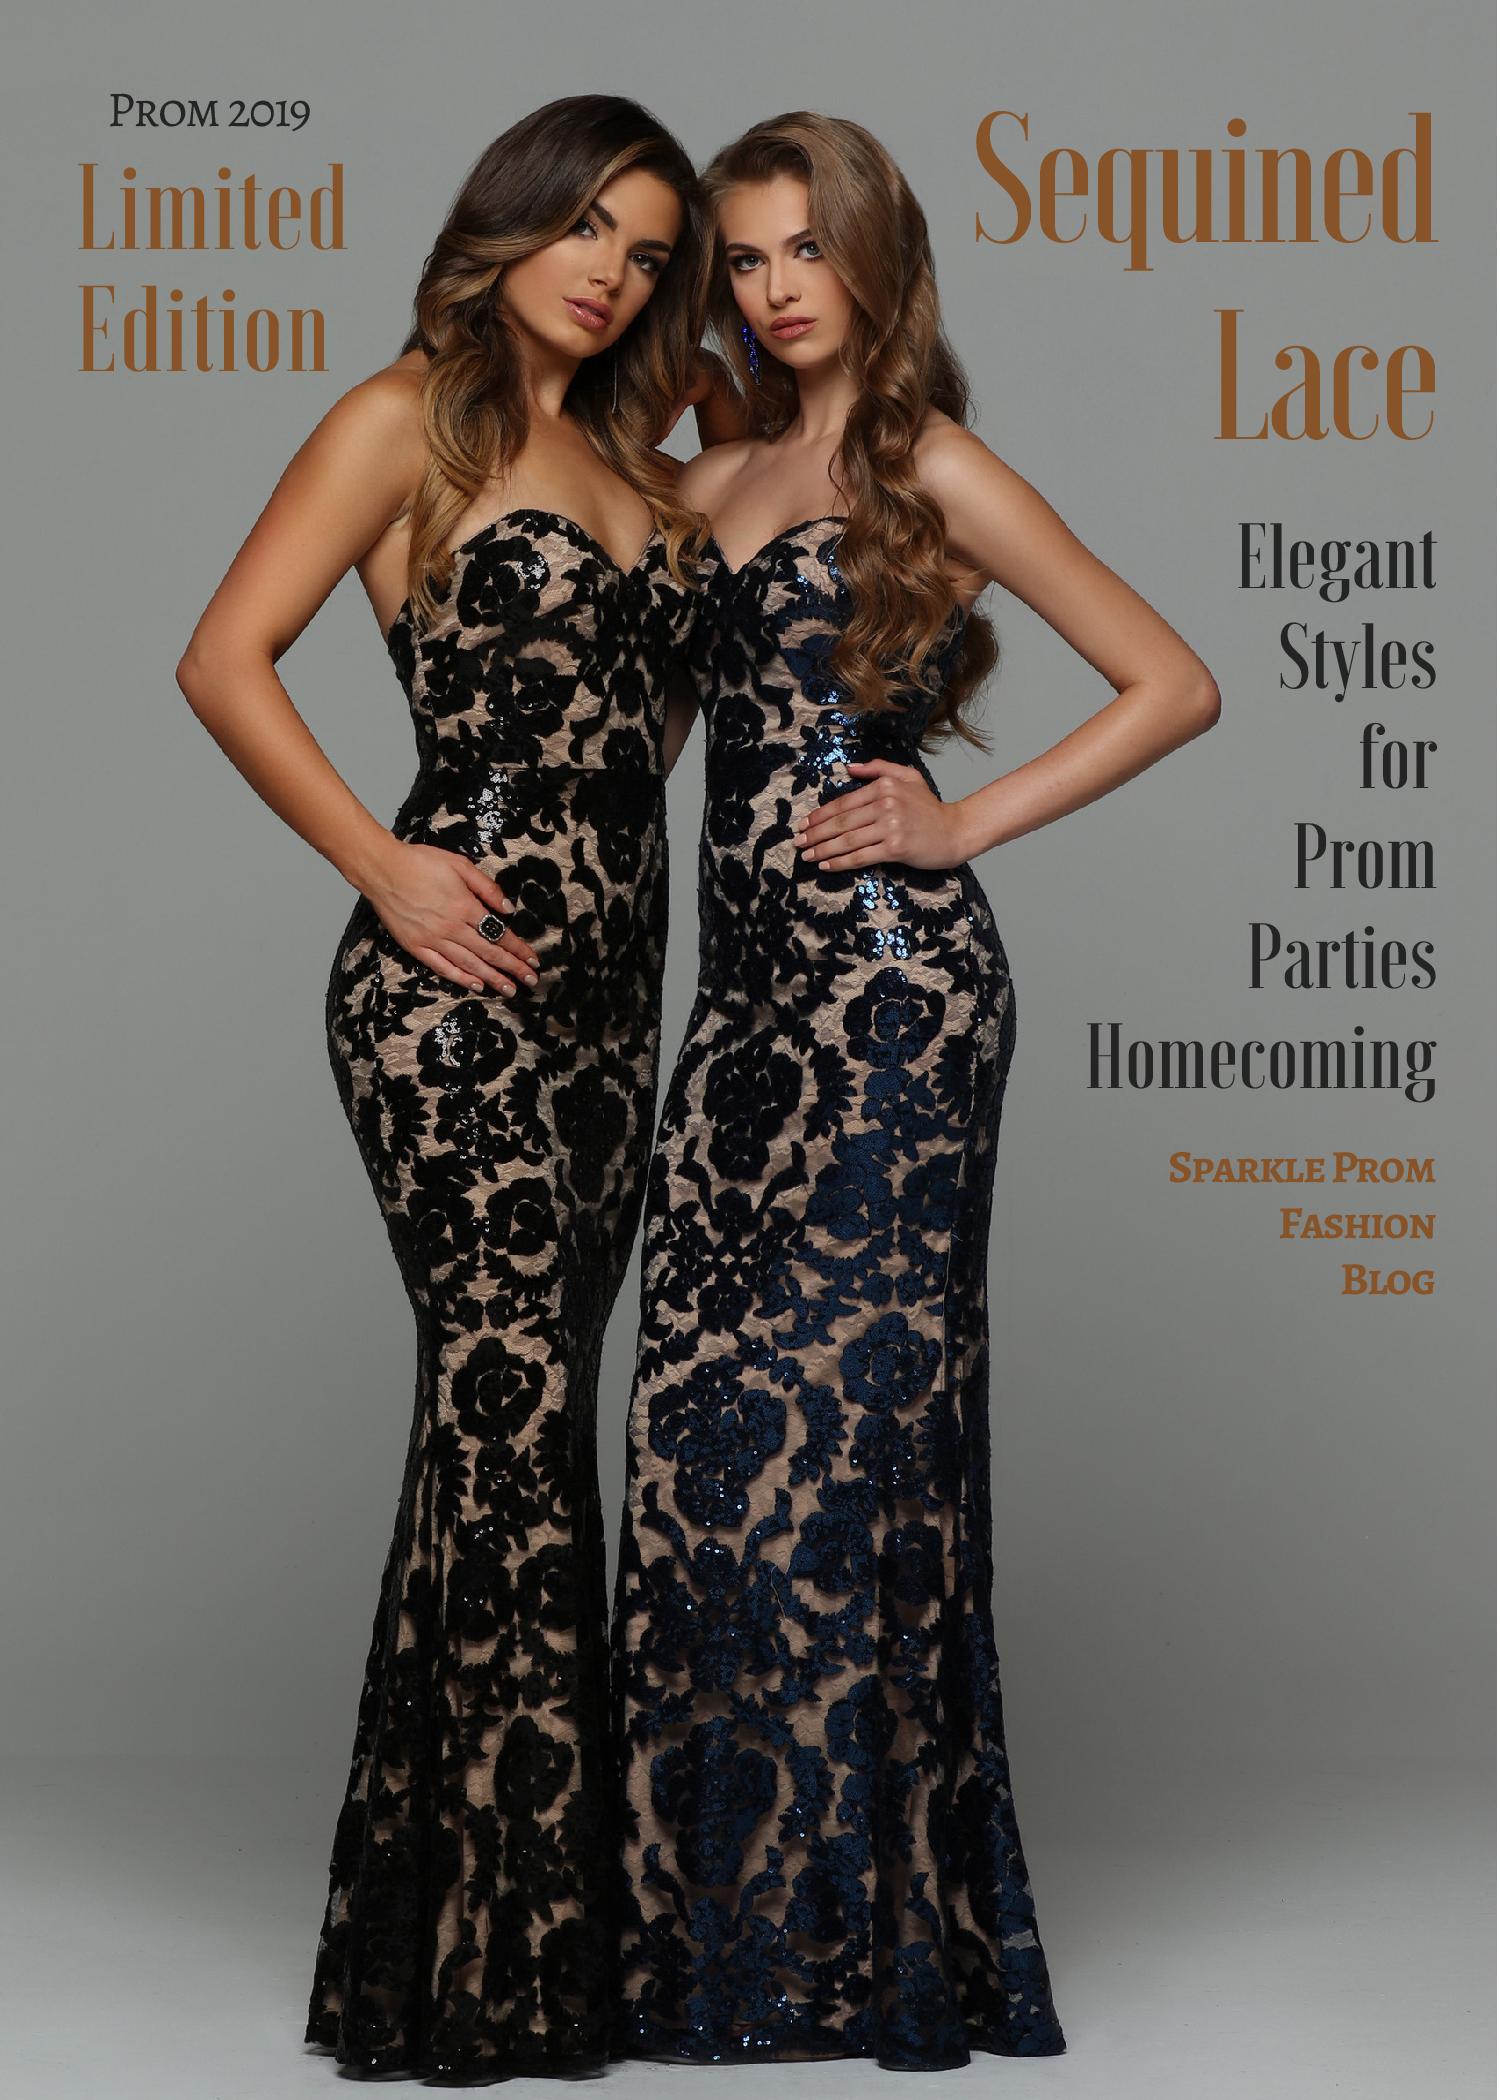 Sequined Lace Prom Dresses 2019 Limited Edition – Sparkle Prom Fashion Blog